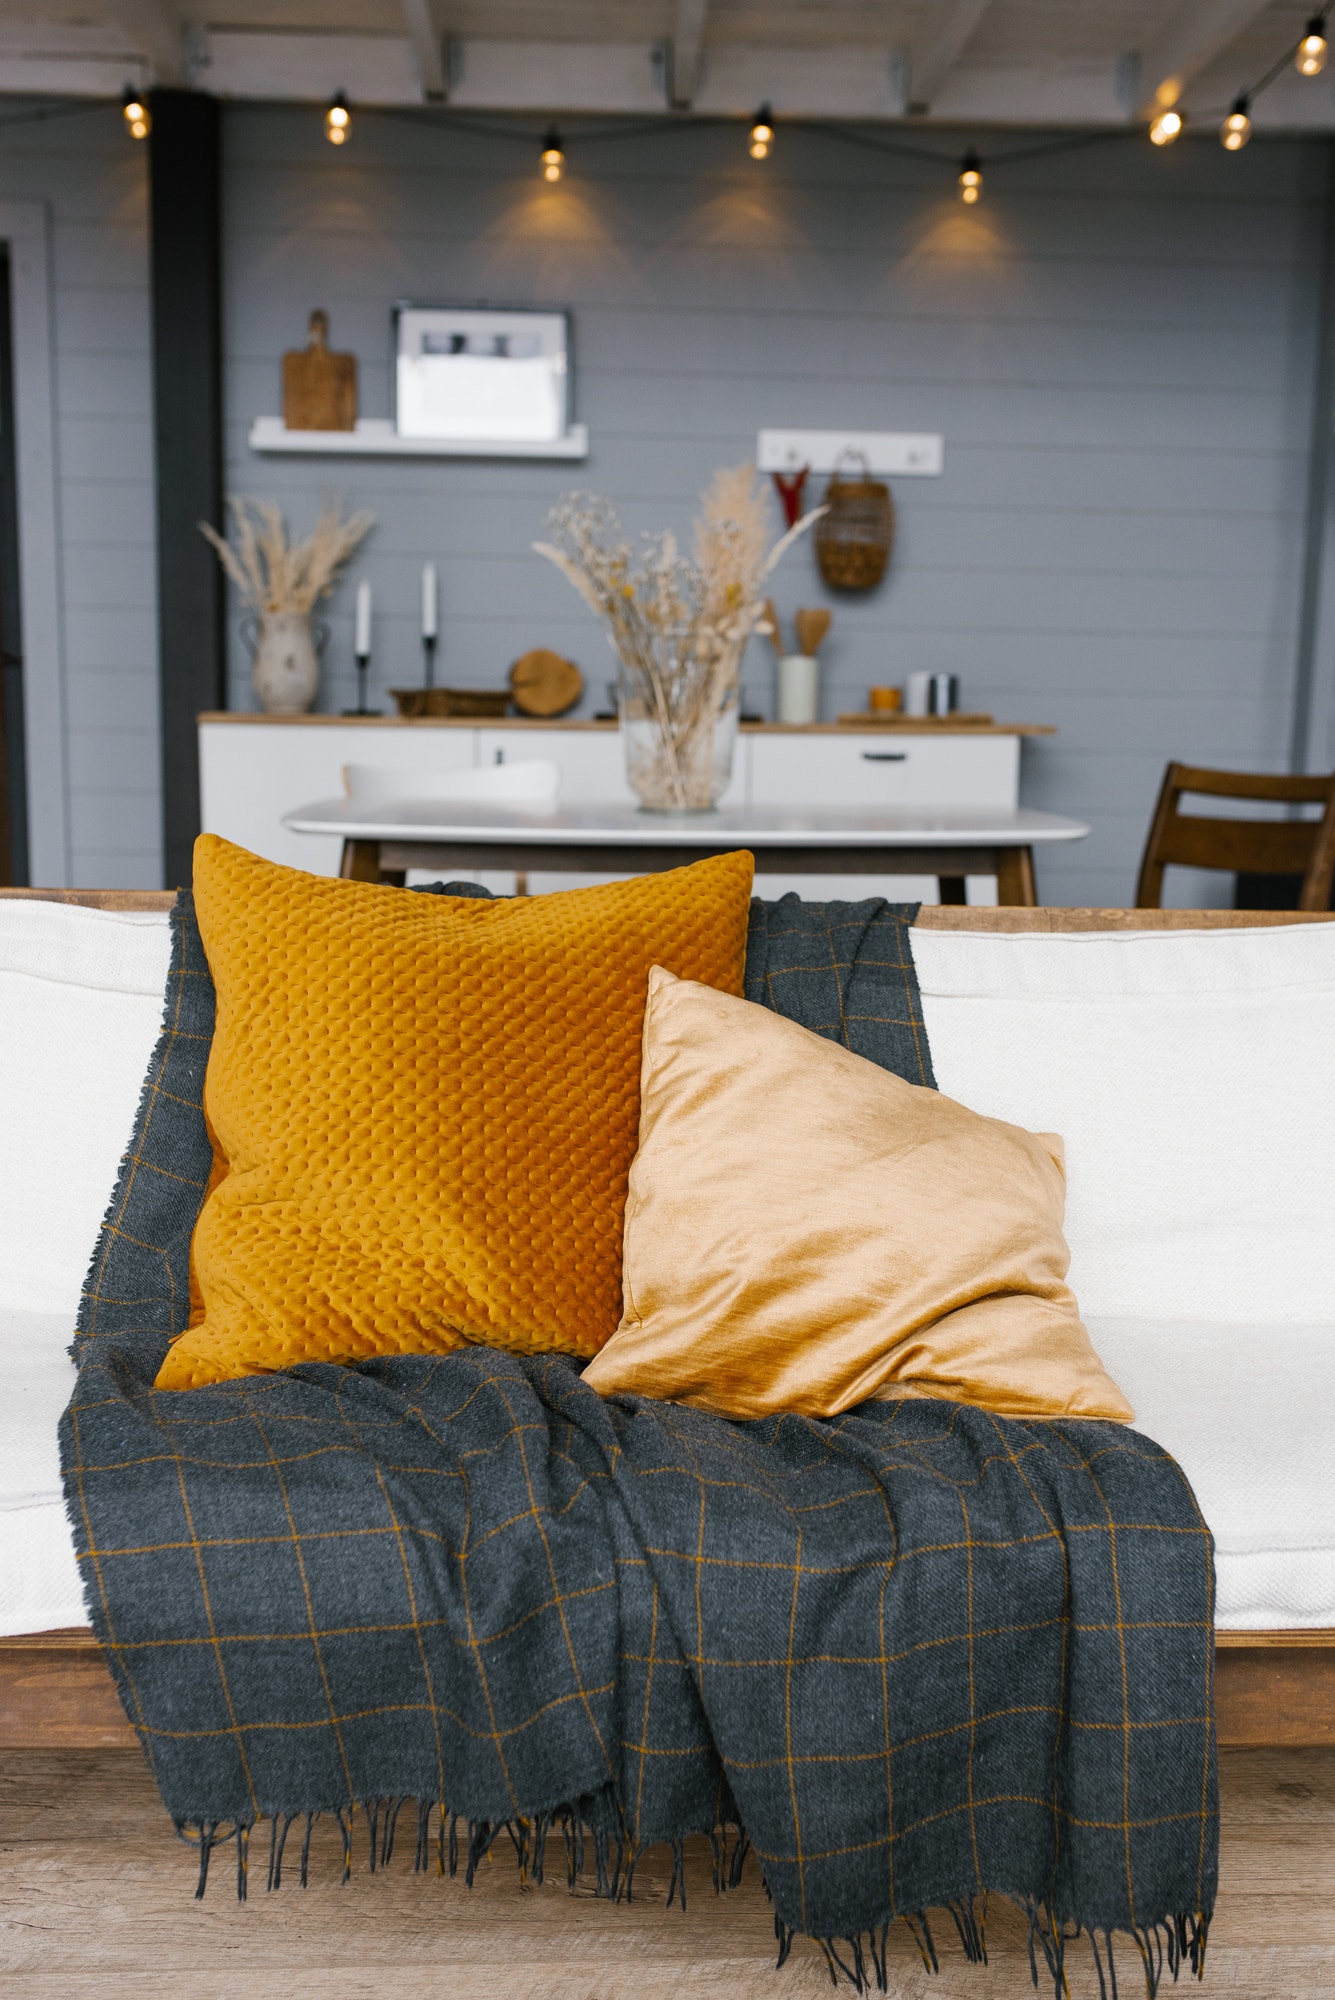 Mustard pillows and a dark plaid plaid on the white sofa in the modern living room.